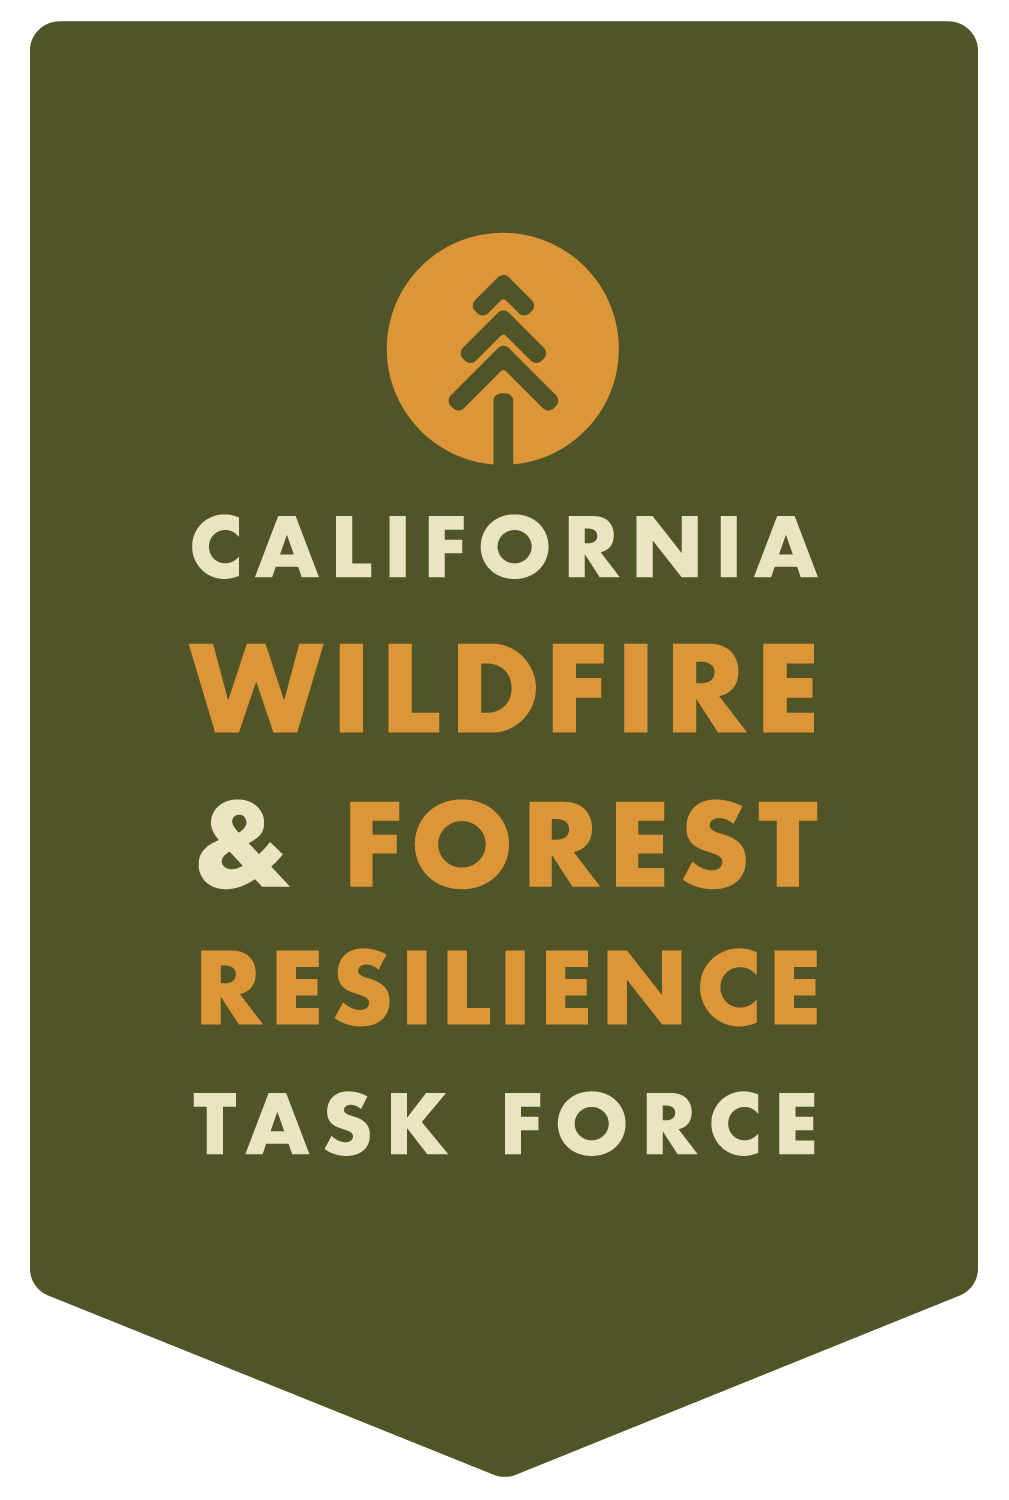 California Wildfire & Forest Resilience Task Force Logo